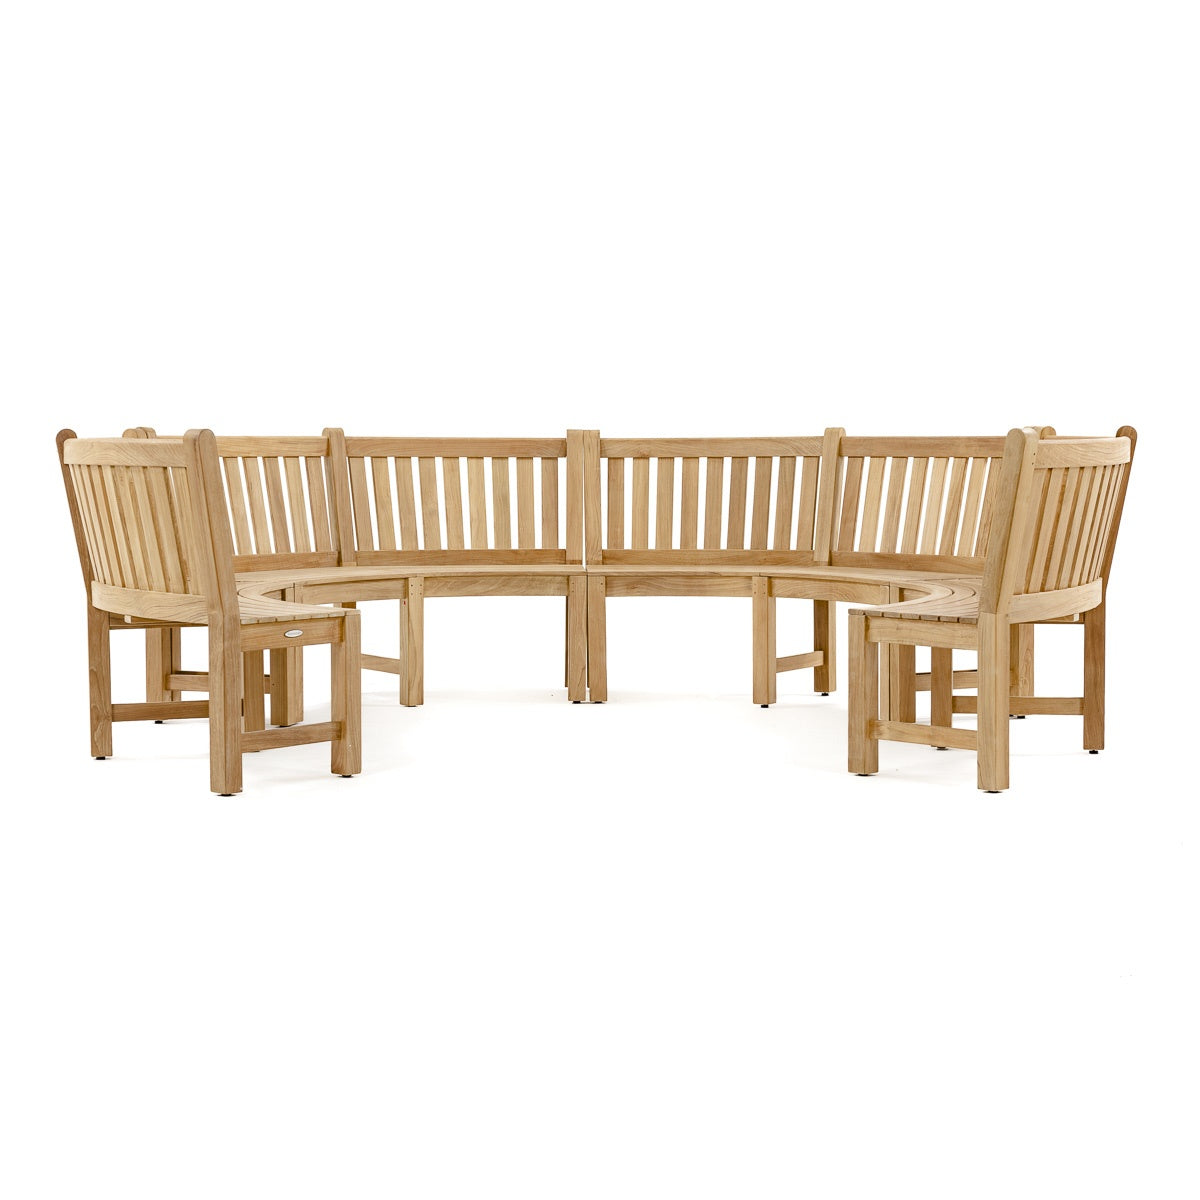 Westminster Teak - Buckingham Bench and Coffee Table Set - Conversation & Chat Seating - 70862